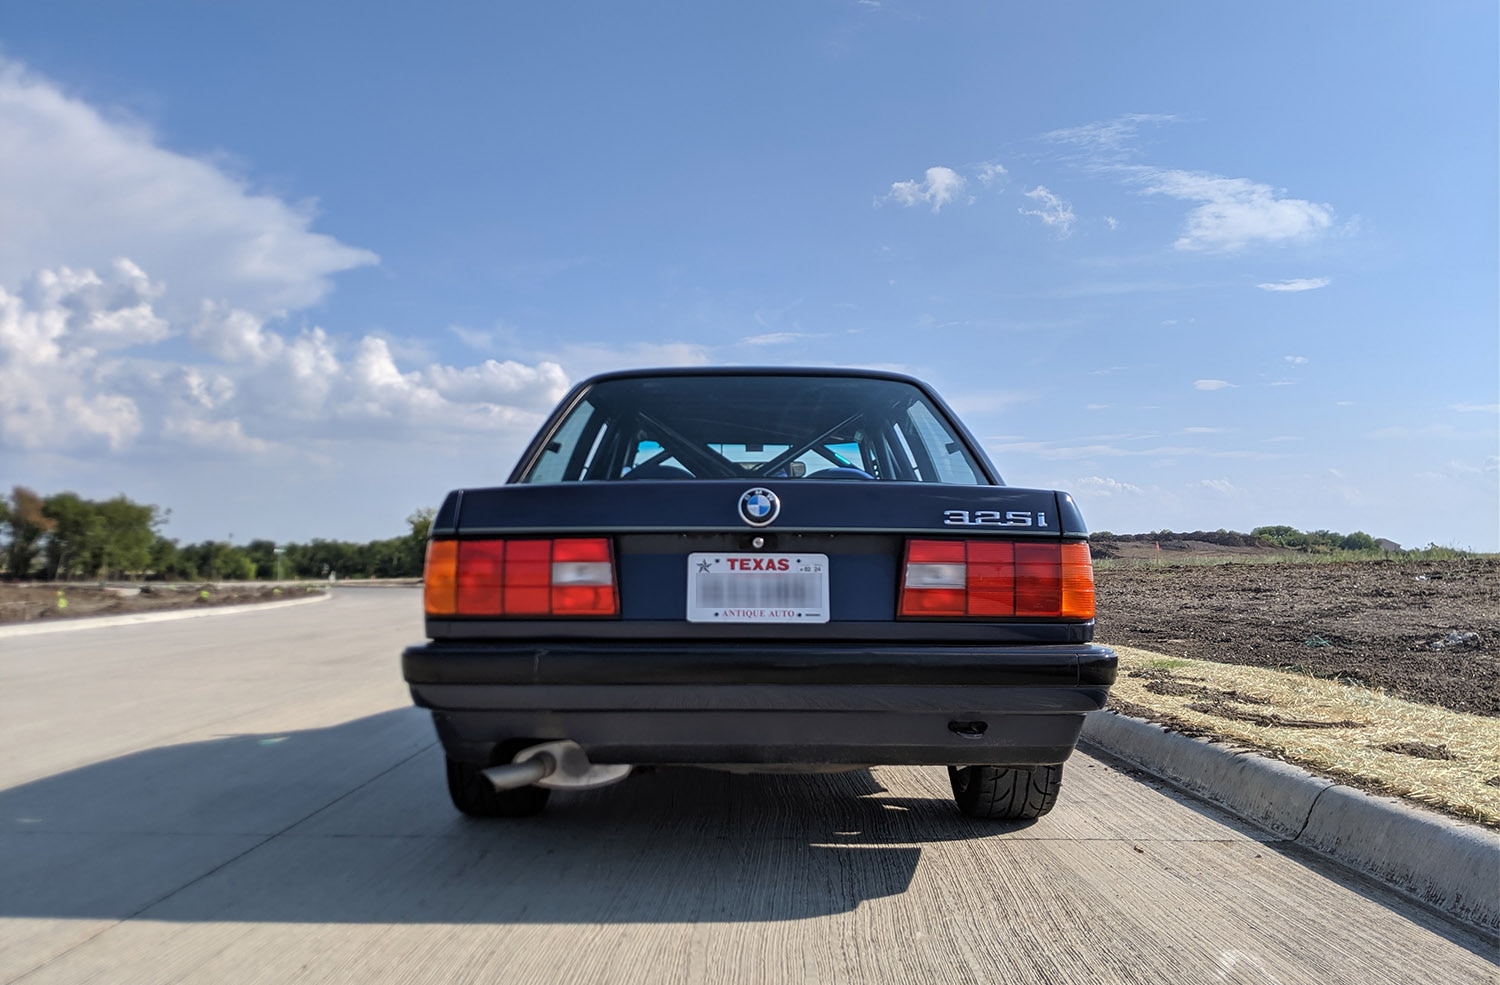 The rear view of a second-generation BMW 3 Series in dark blue with a Texas antique auto license plate